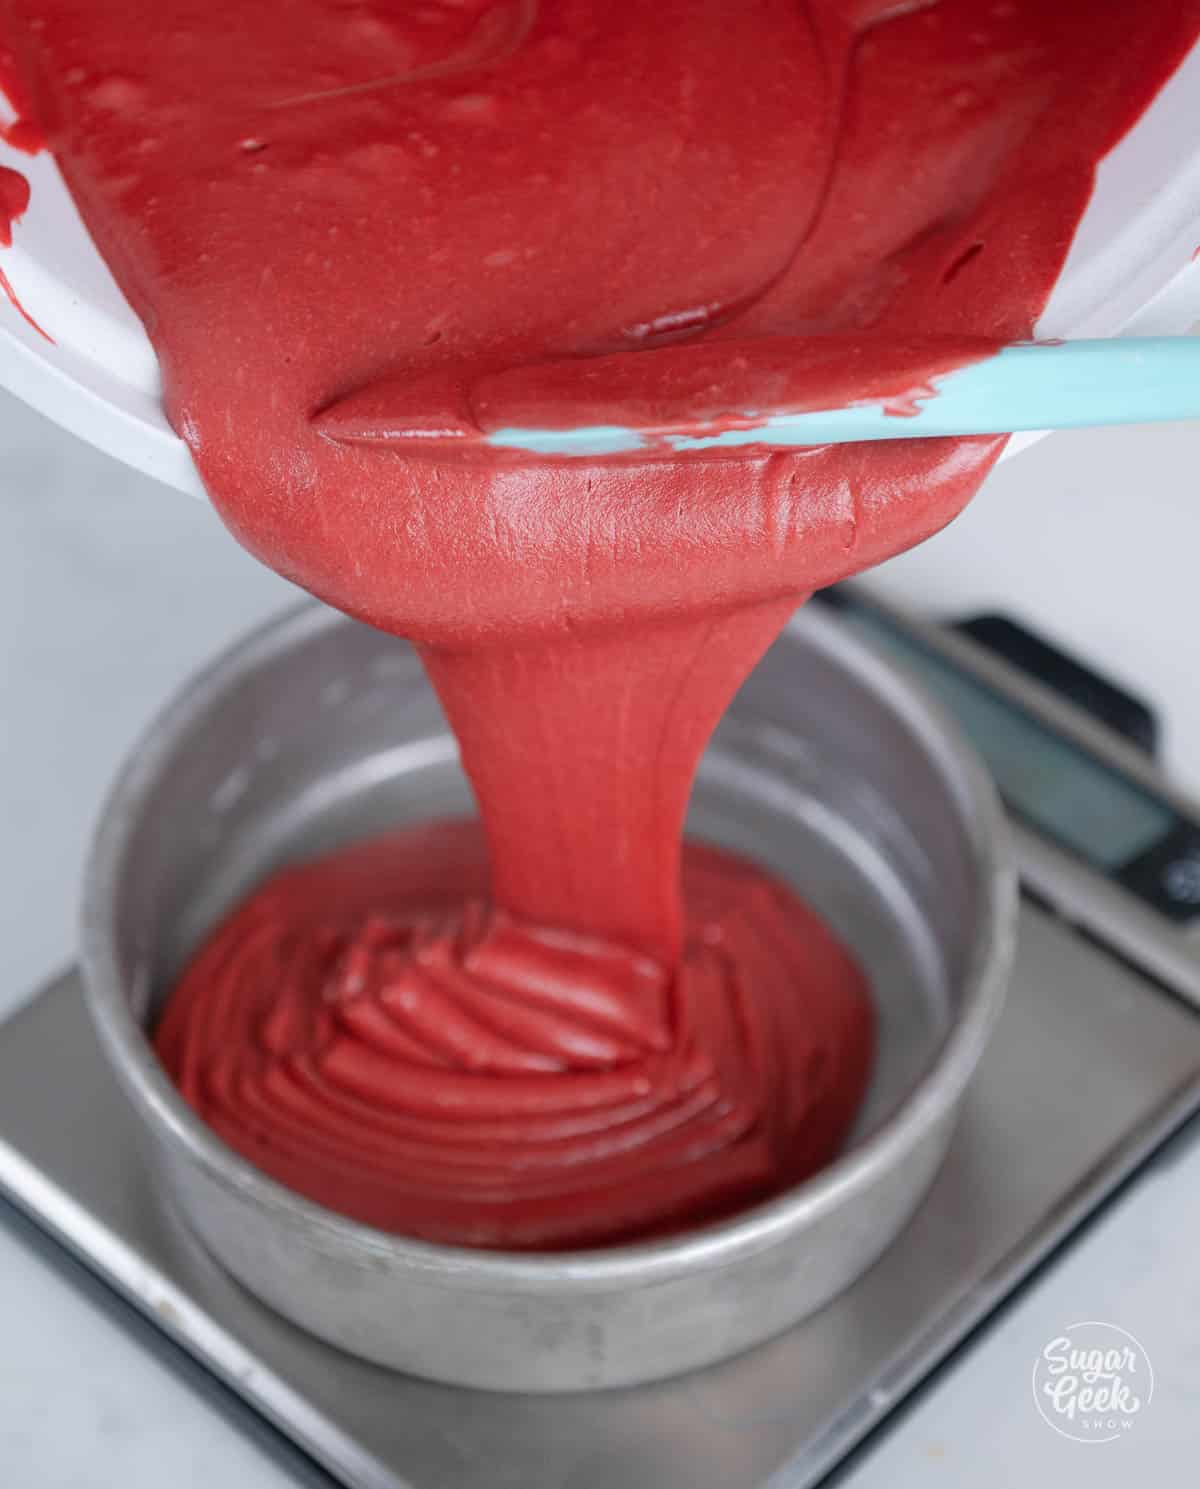 Pouring finished red velvet cake batter into a cake pan.